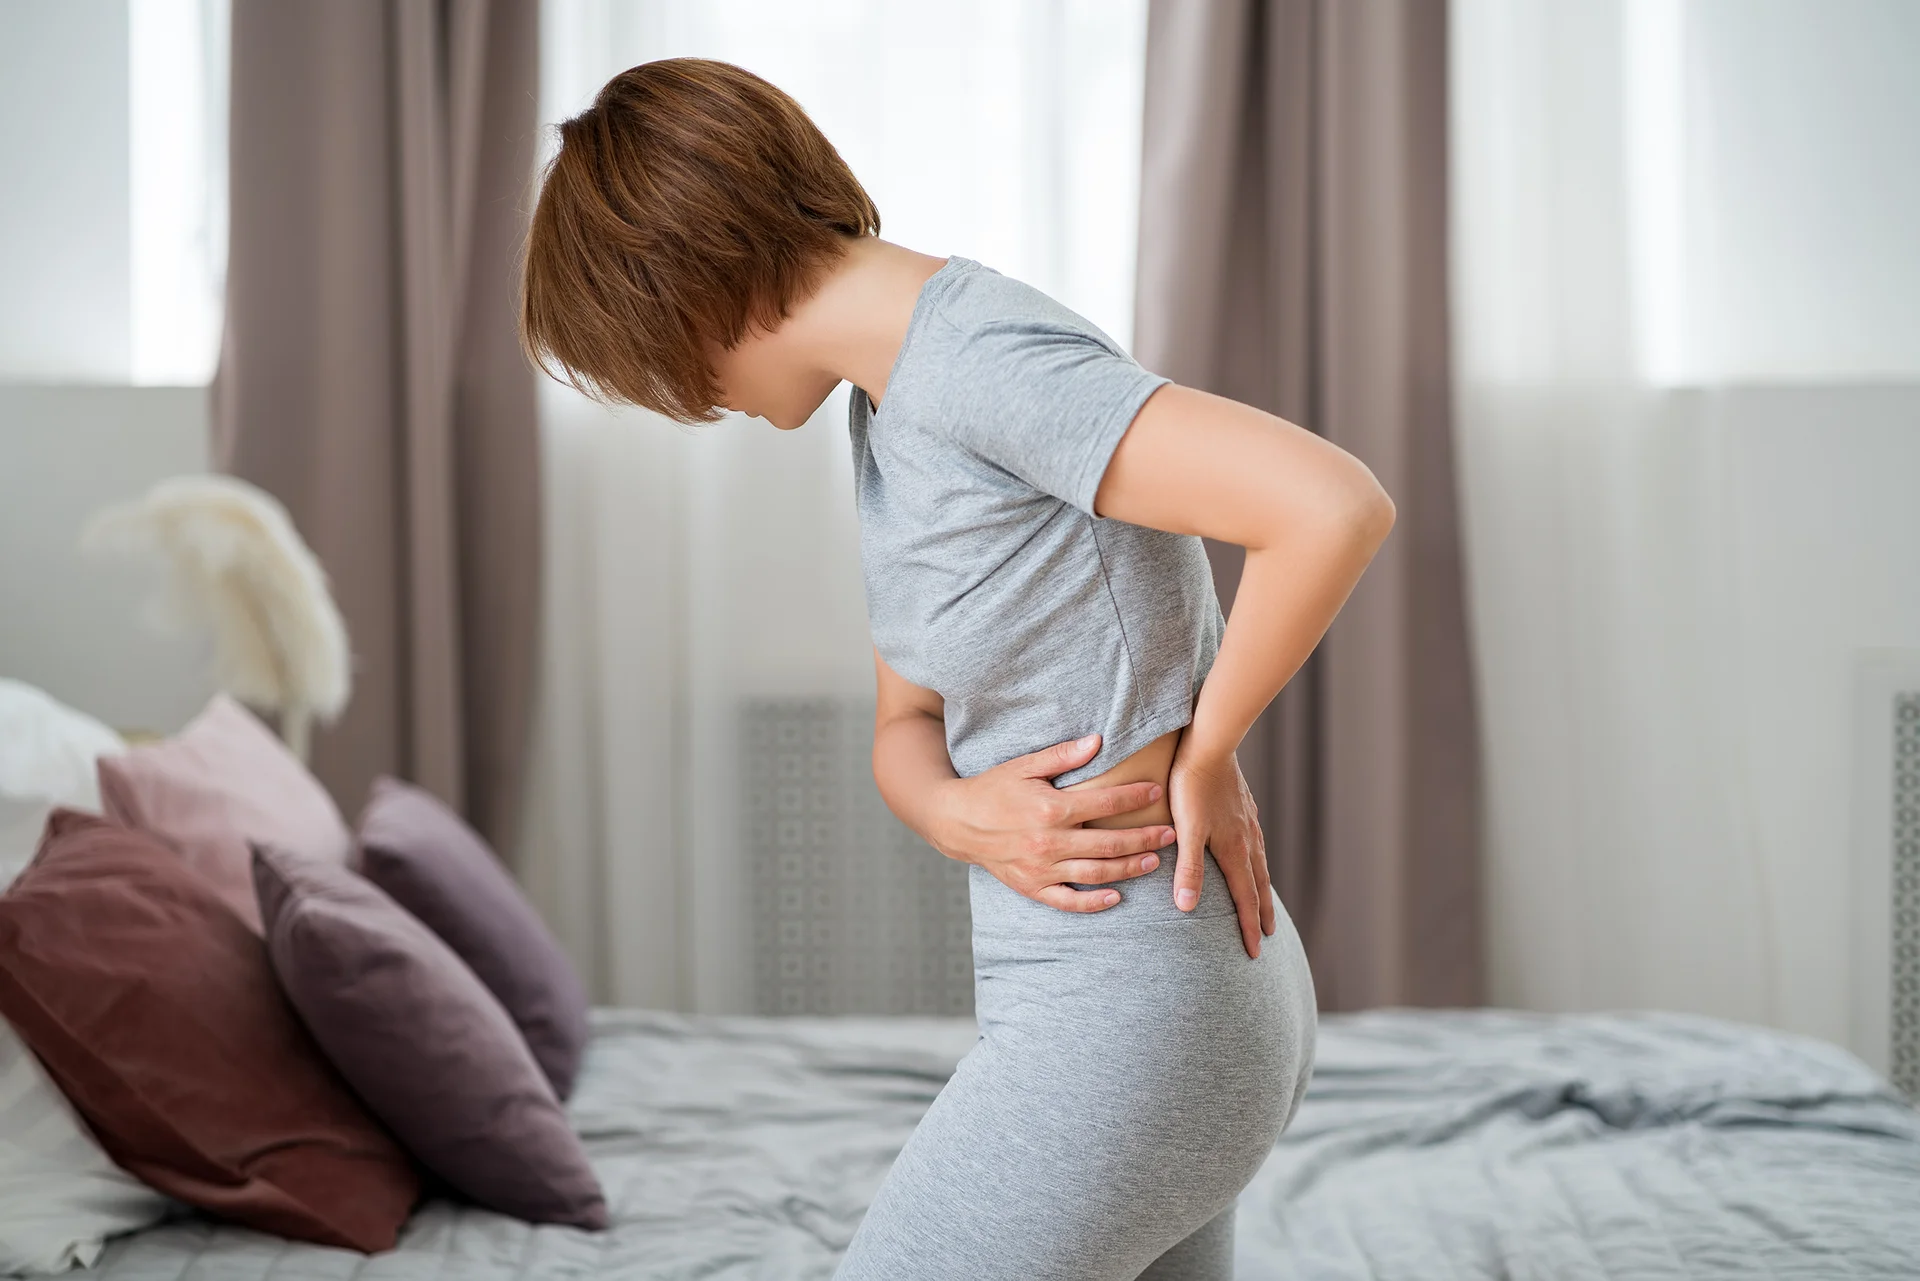 a woman suffer low back pain due to diverticulitis